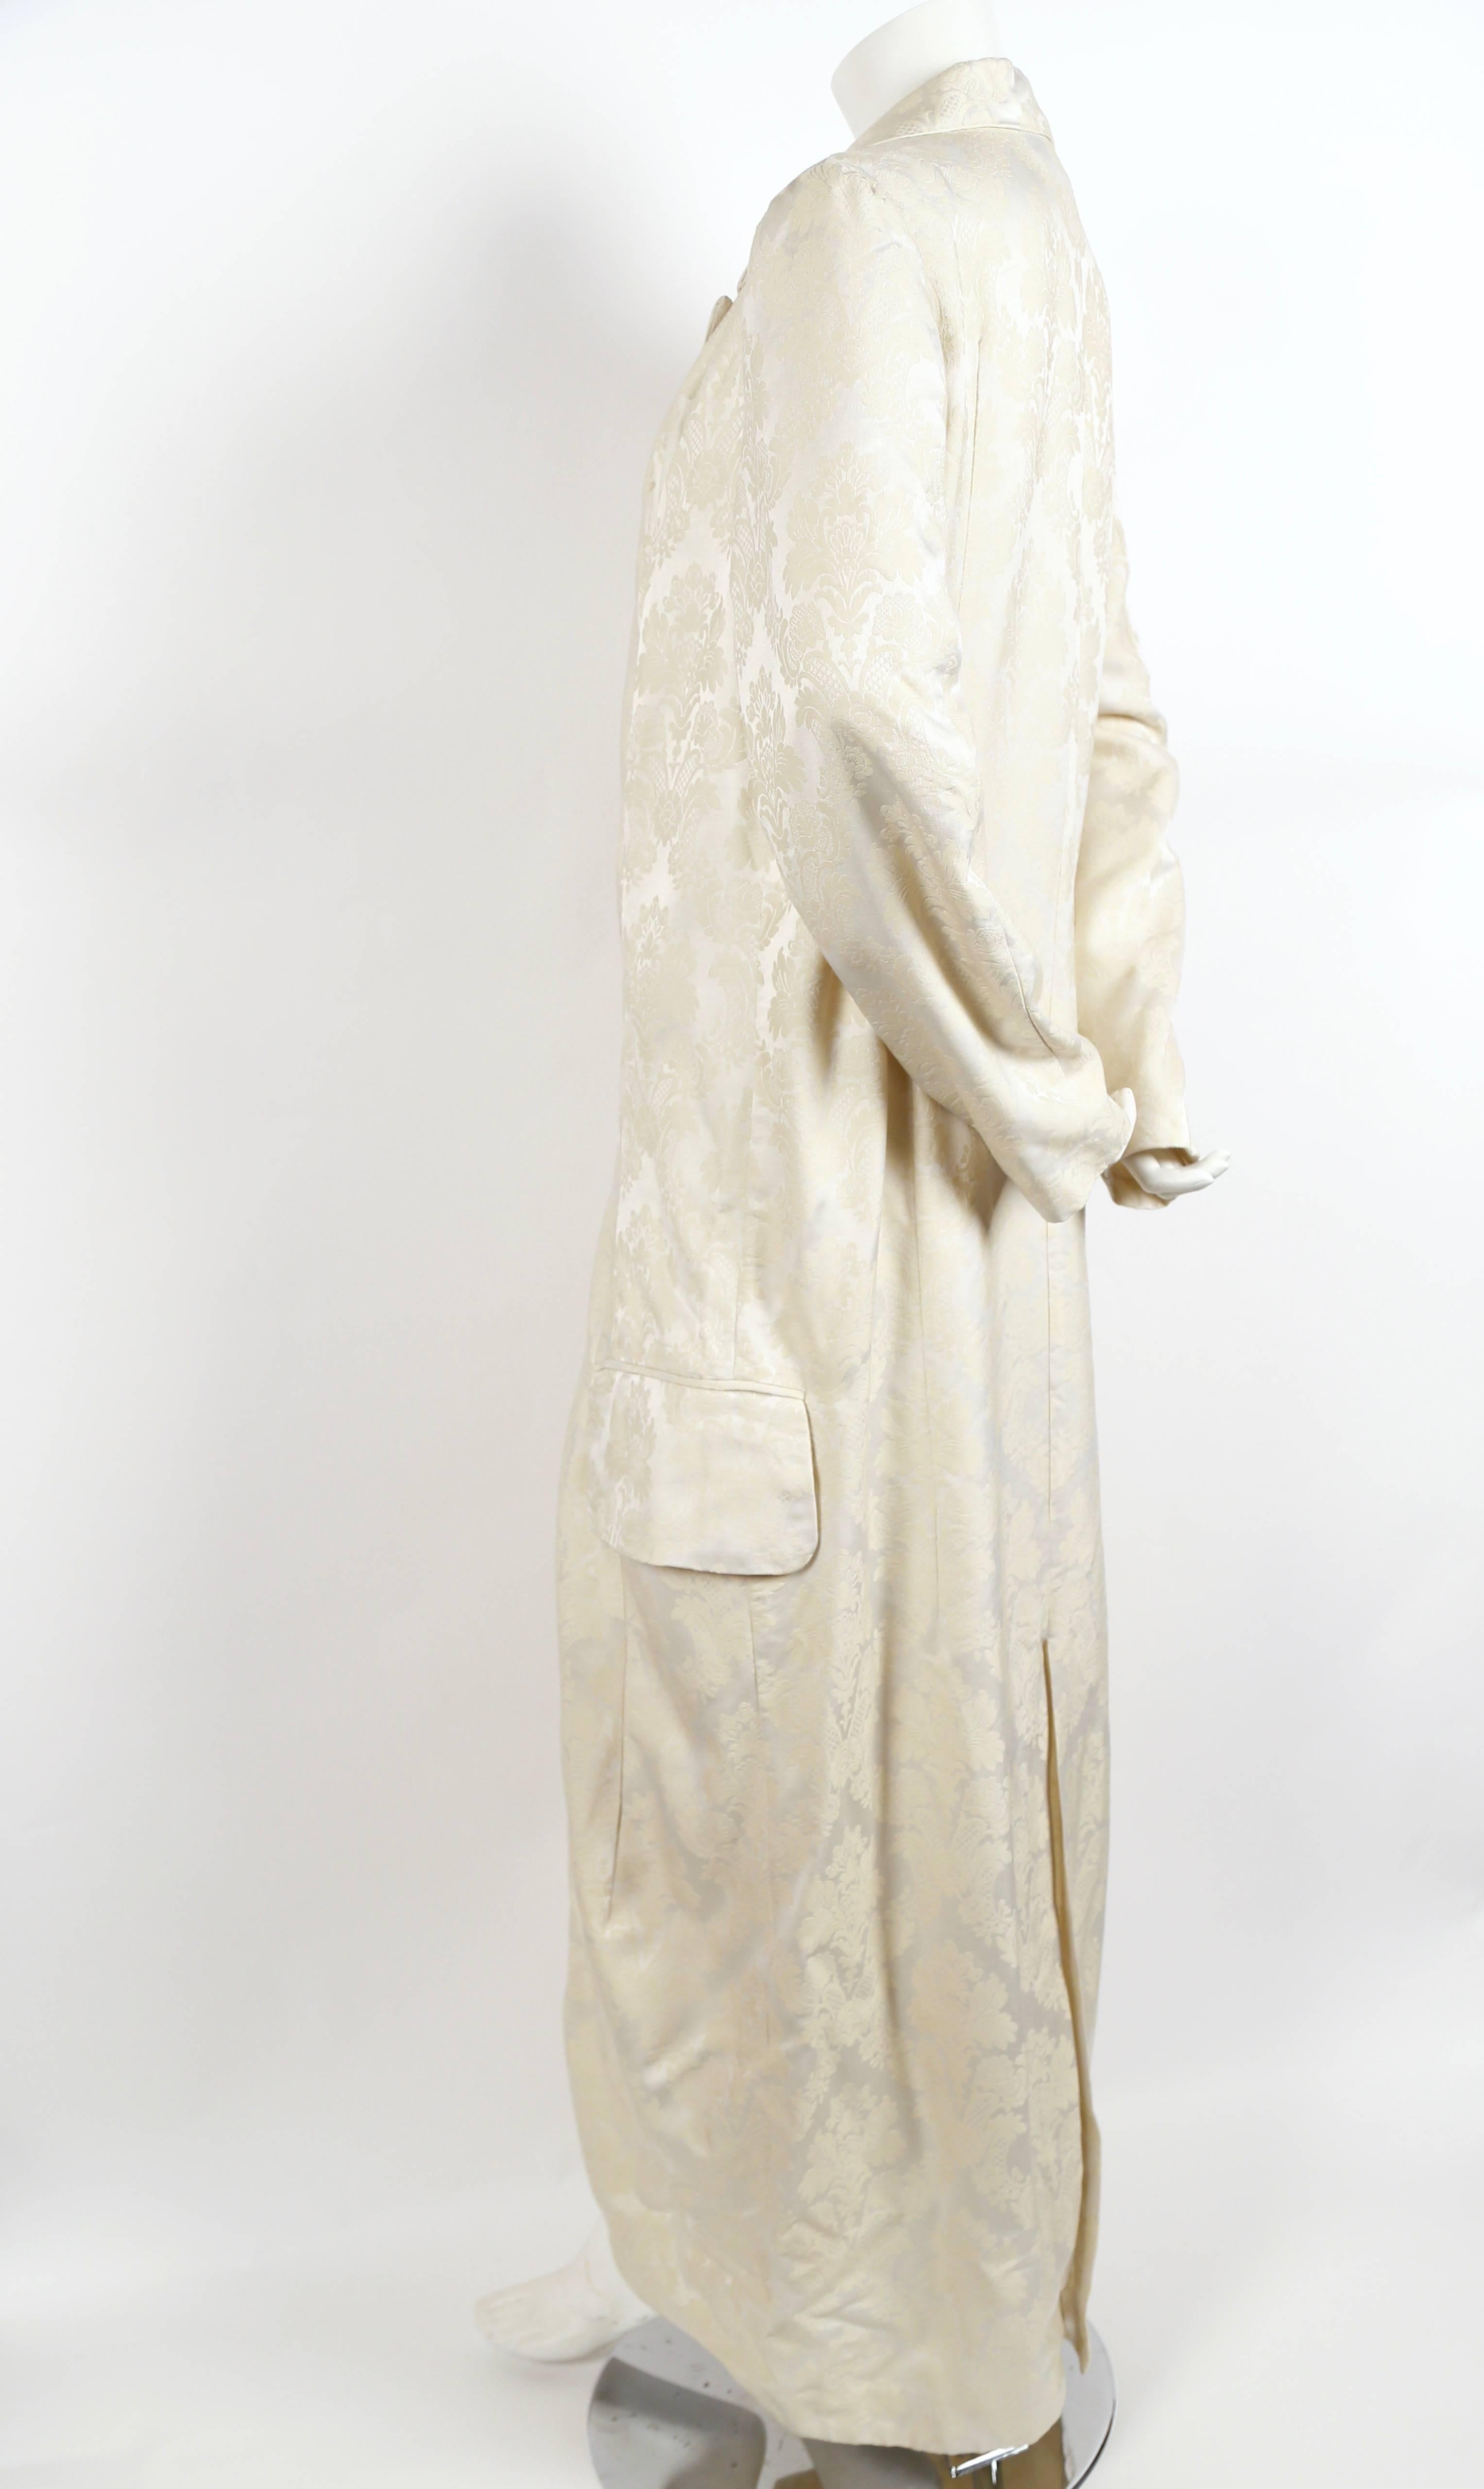 Exaggeratedly long cream brocade coat designed by Rei Kawakubo dating to spring of 1993. Size M. Approximate measurements: shoulder 17", bust 42", waist 39", hips 42", arm length 25.5" and overall length 59". Button